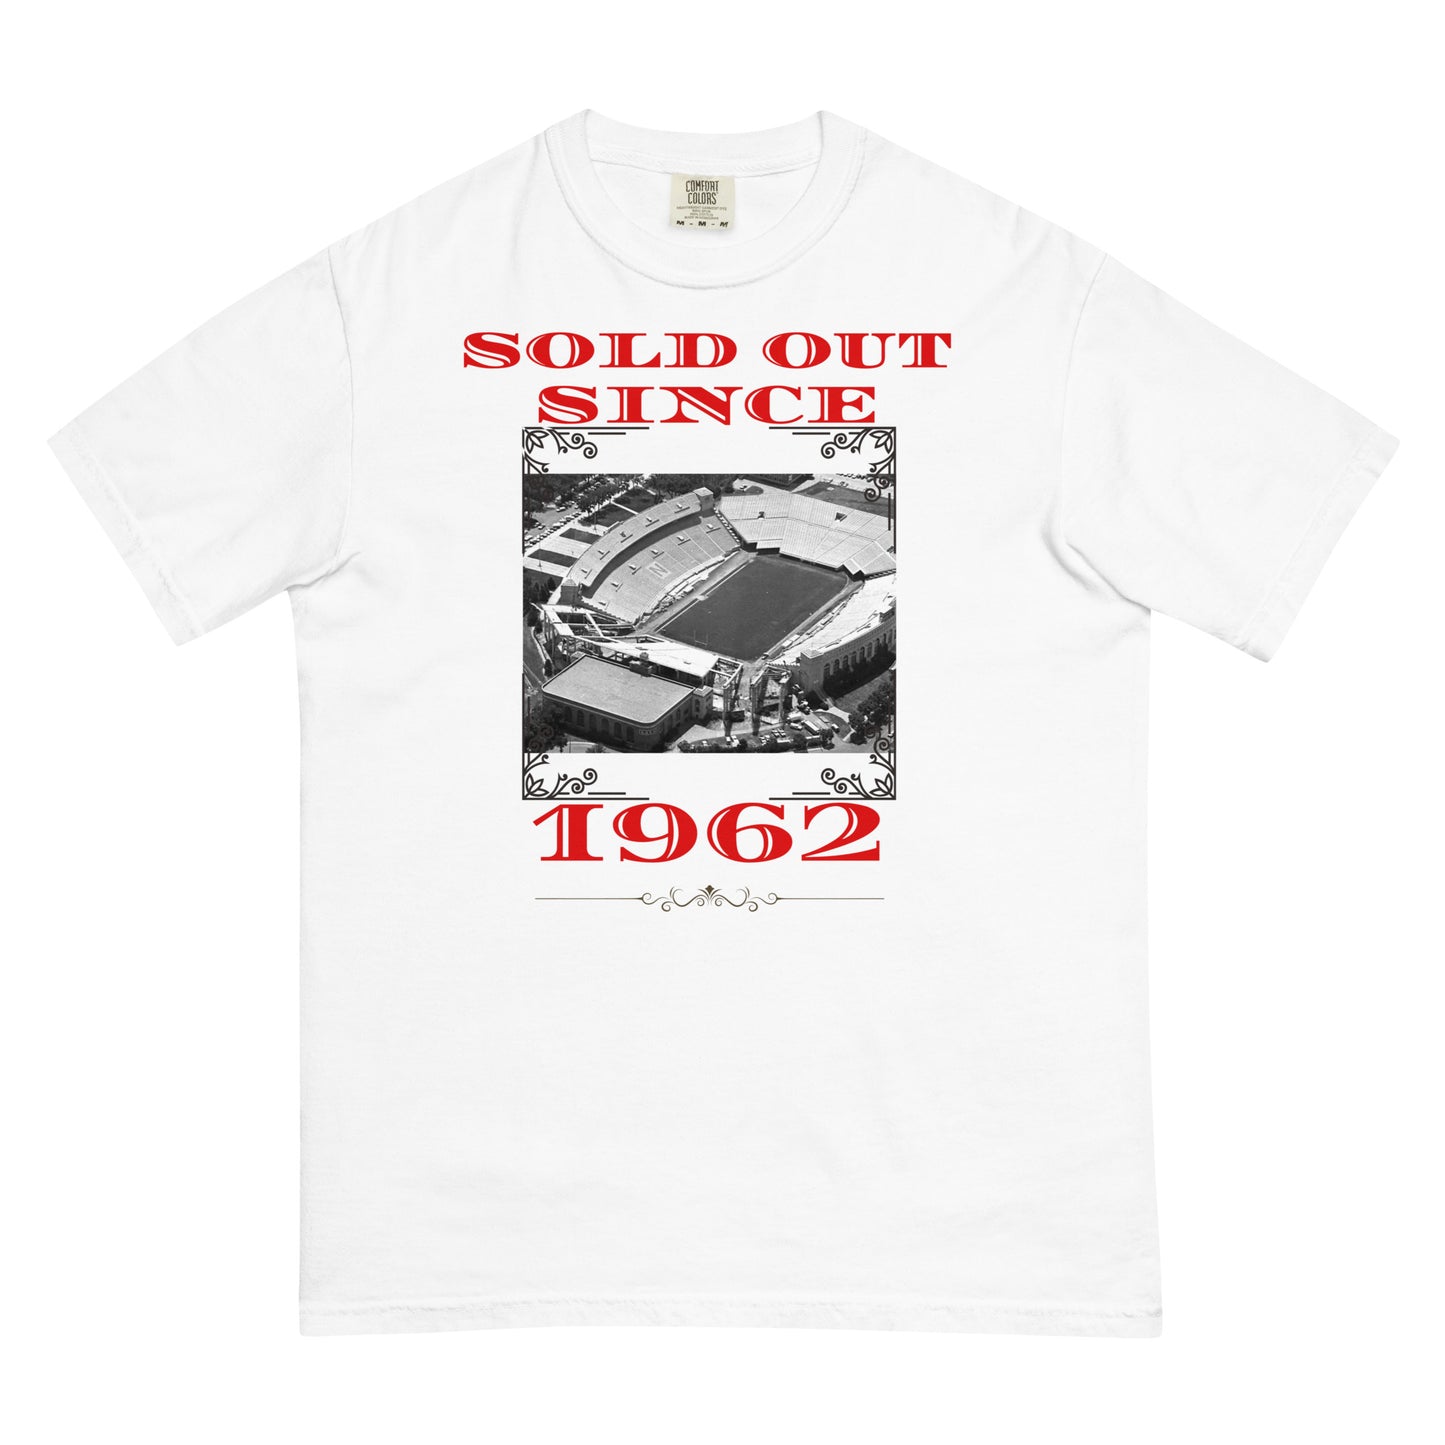 Sold Out Since '62 T-shirt